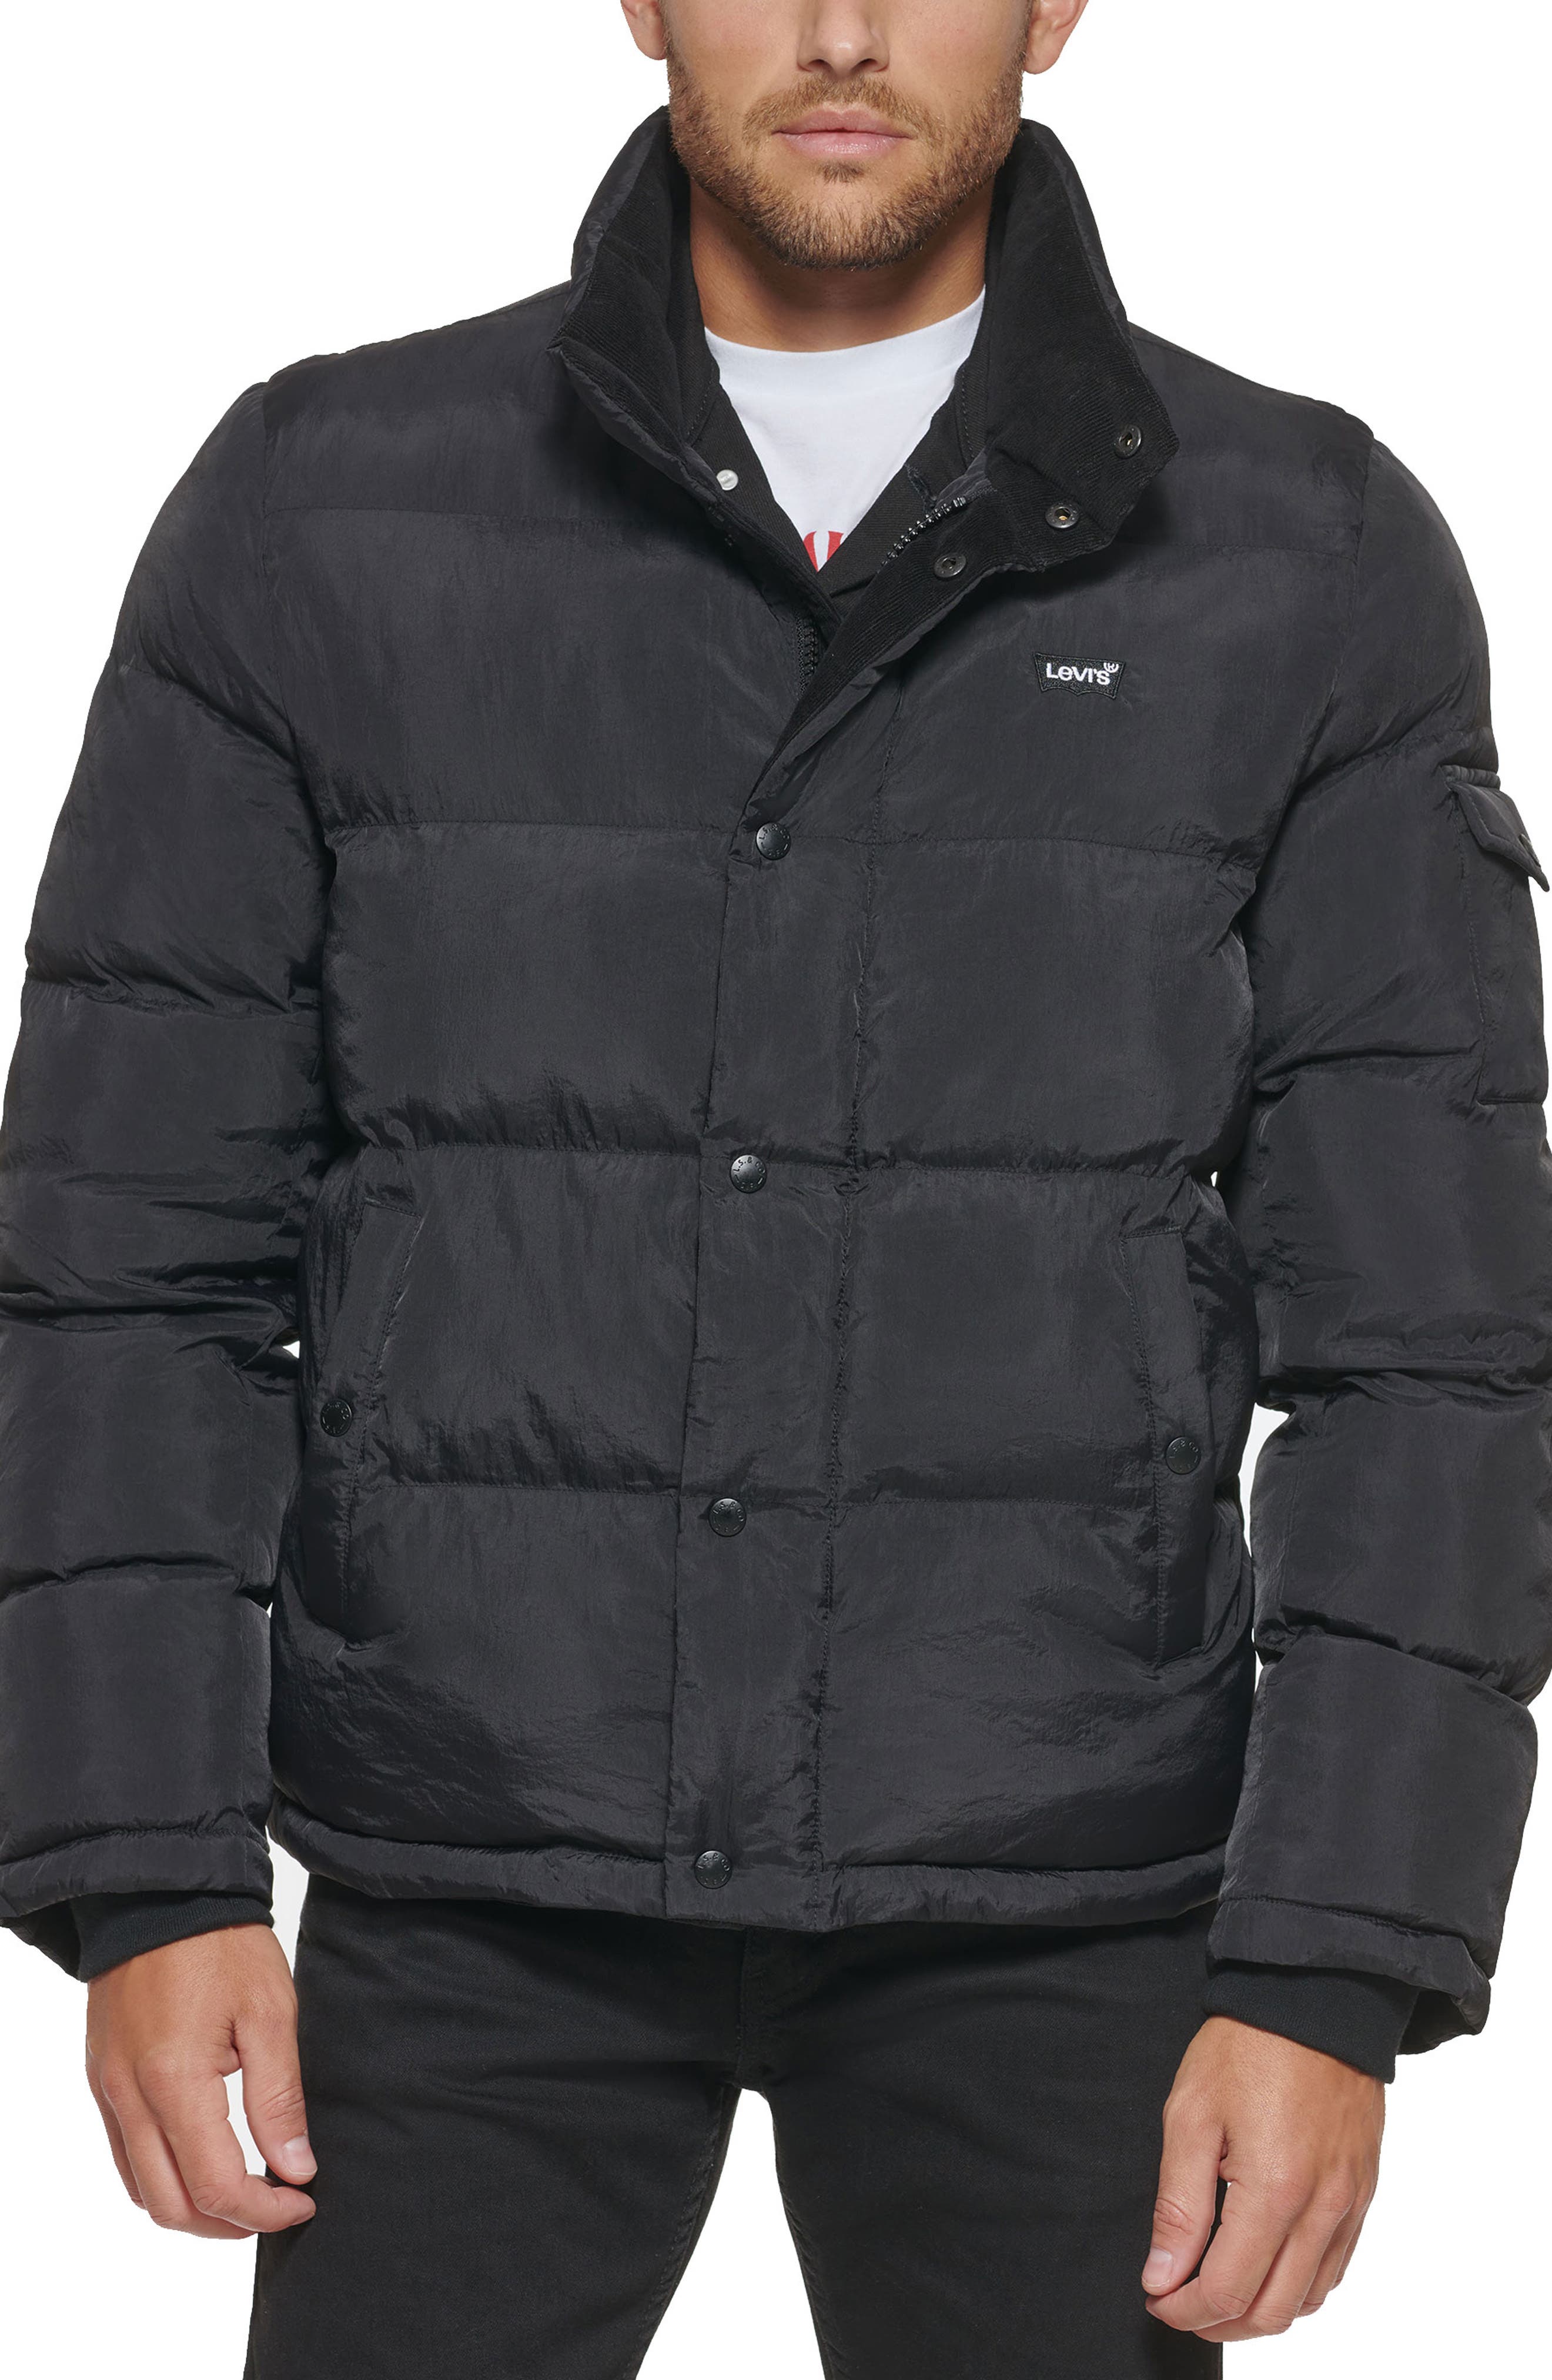 Ptyhk RG Mens Hooded Puffer Down Jacket Zippered Mid Length Outerwear 